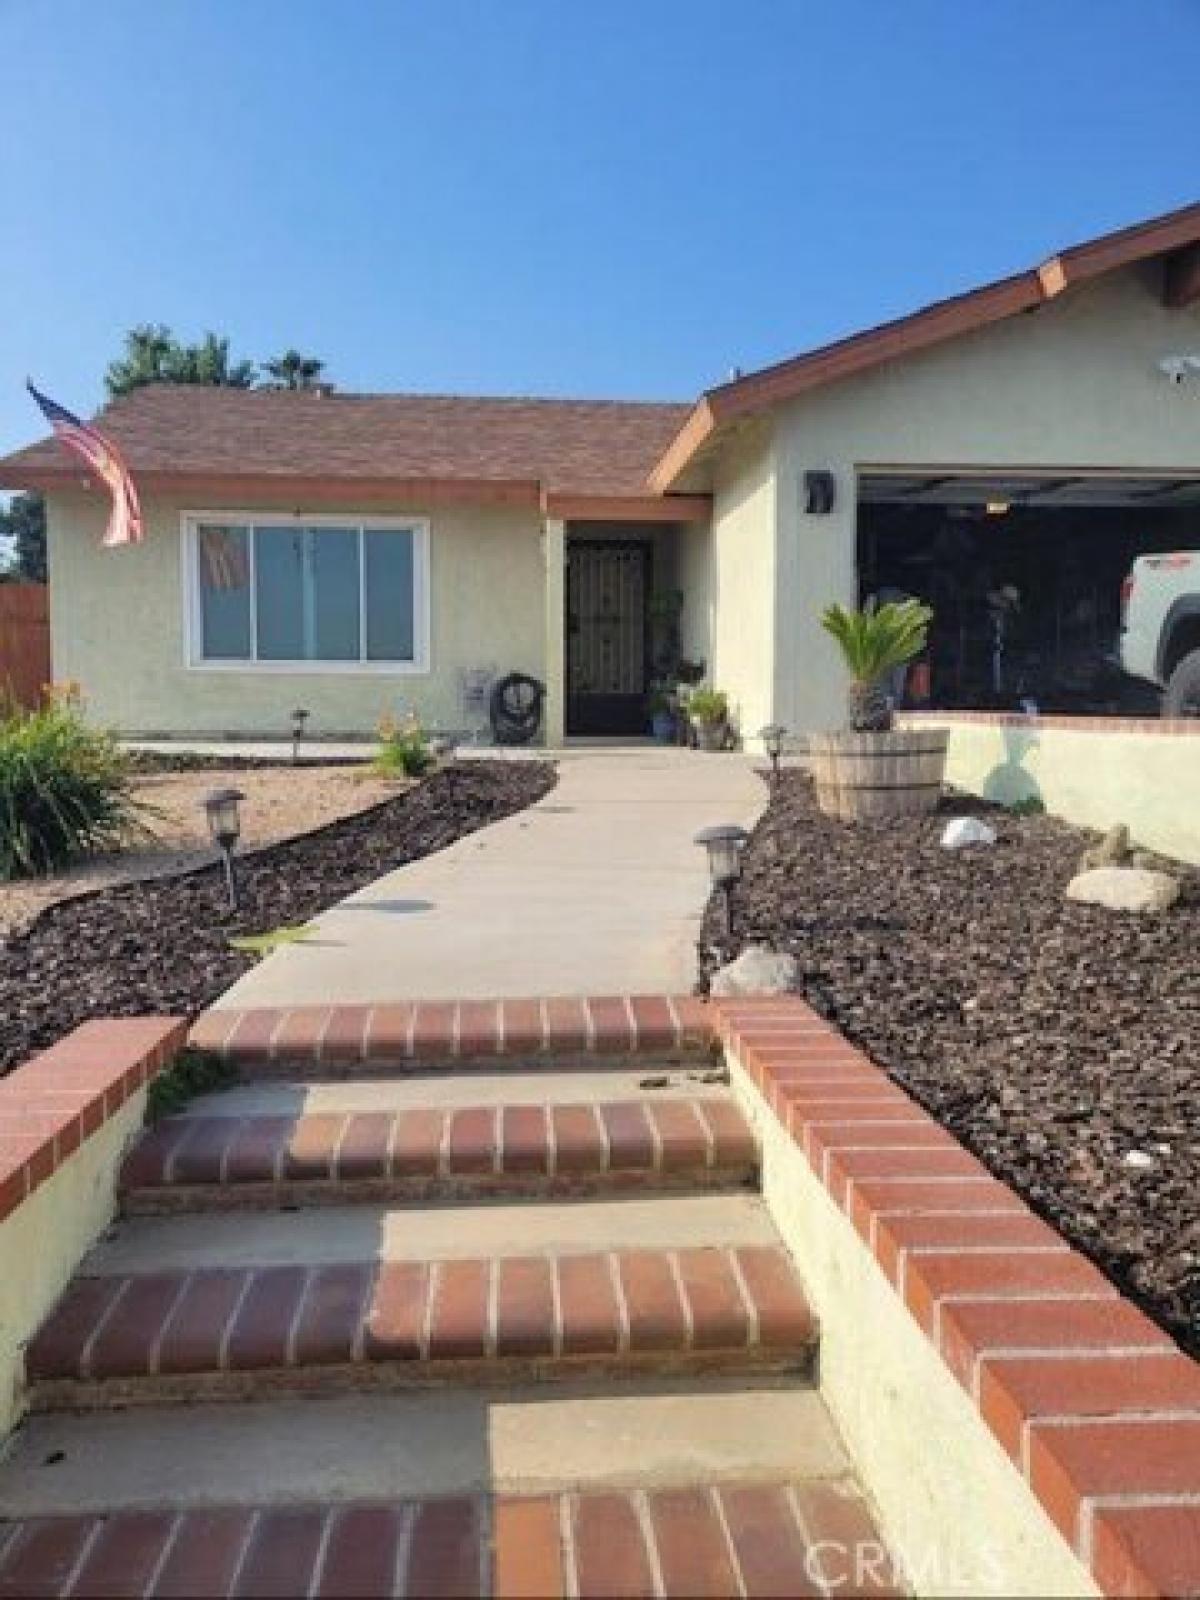 Picture of Home For Sale in Moreno Valley, California, United States